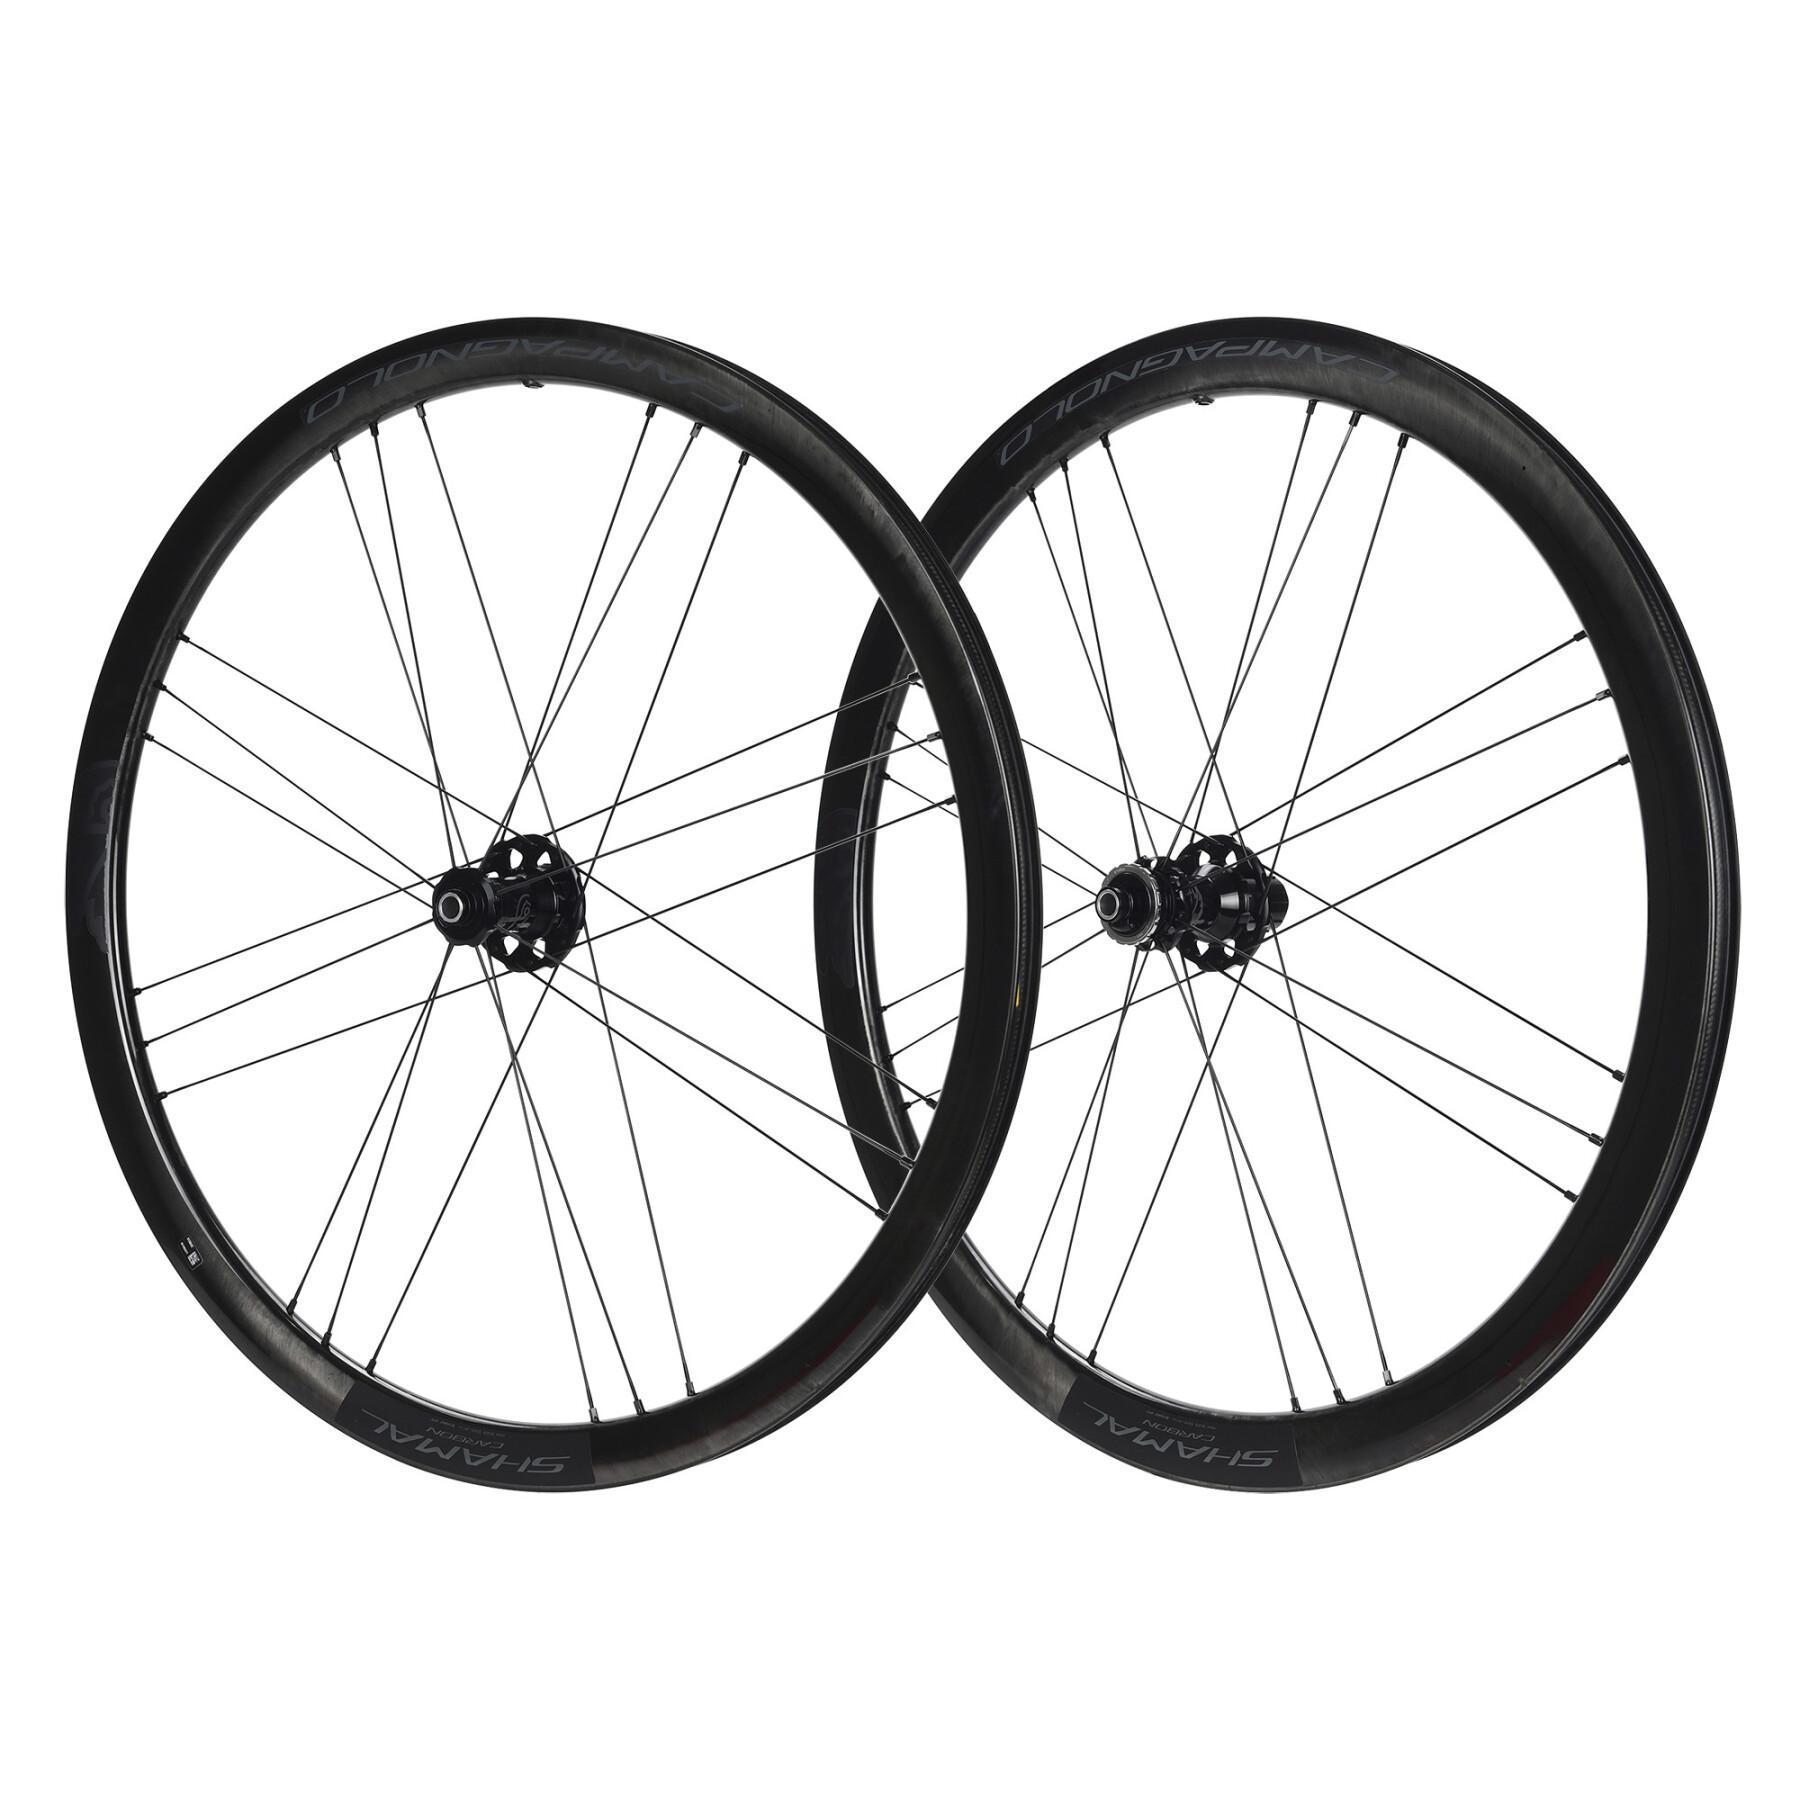 Set of 2 bicycle wheels Campagnolo Shamal C21 2Wf Disque Tubeless Ready Campagnolo N3W